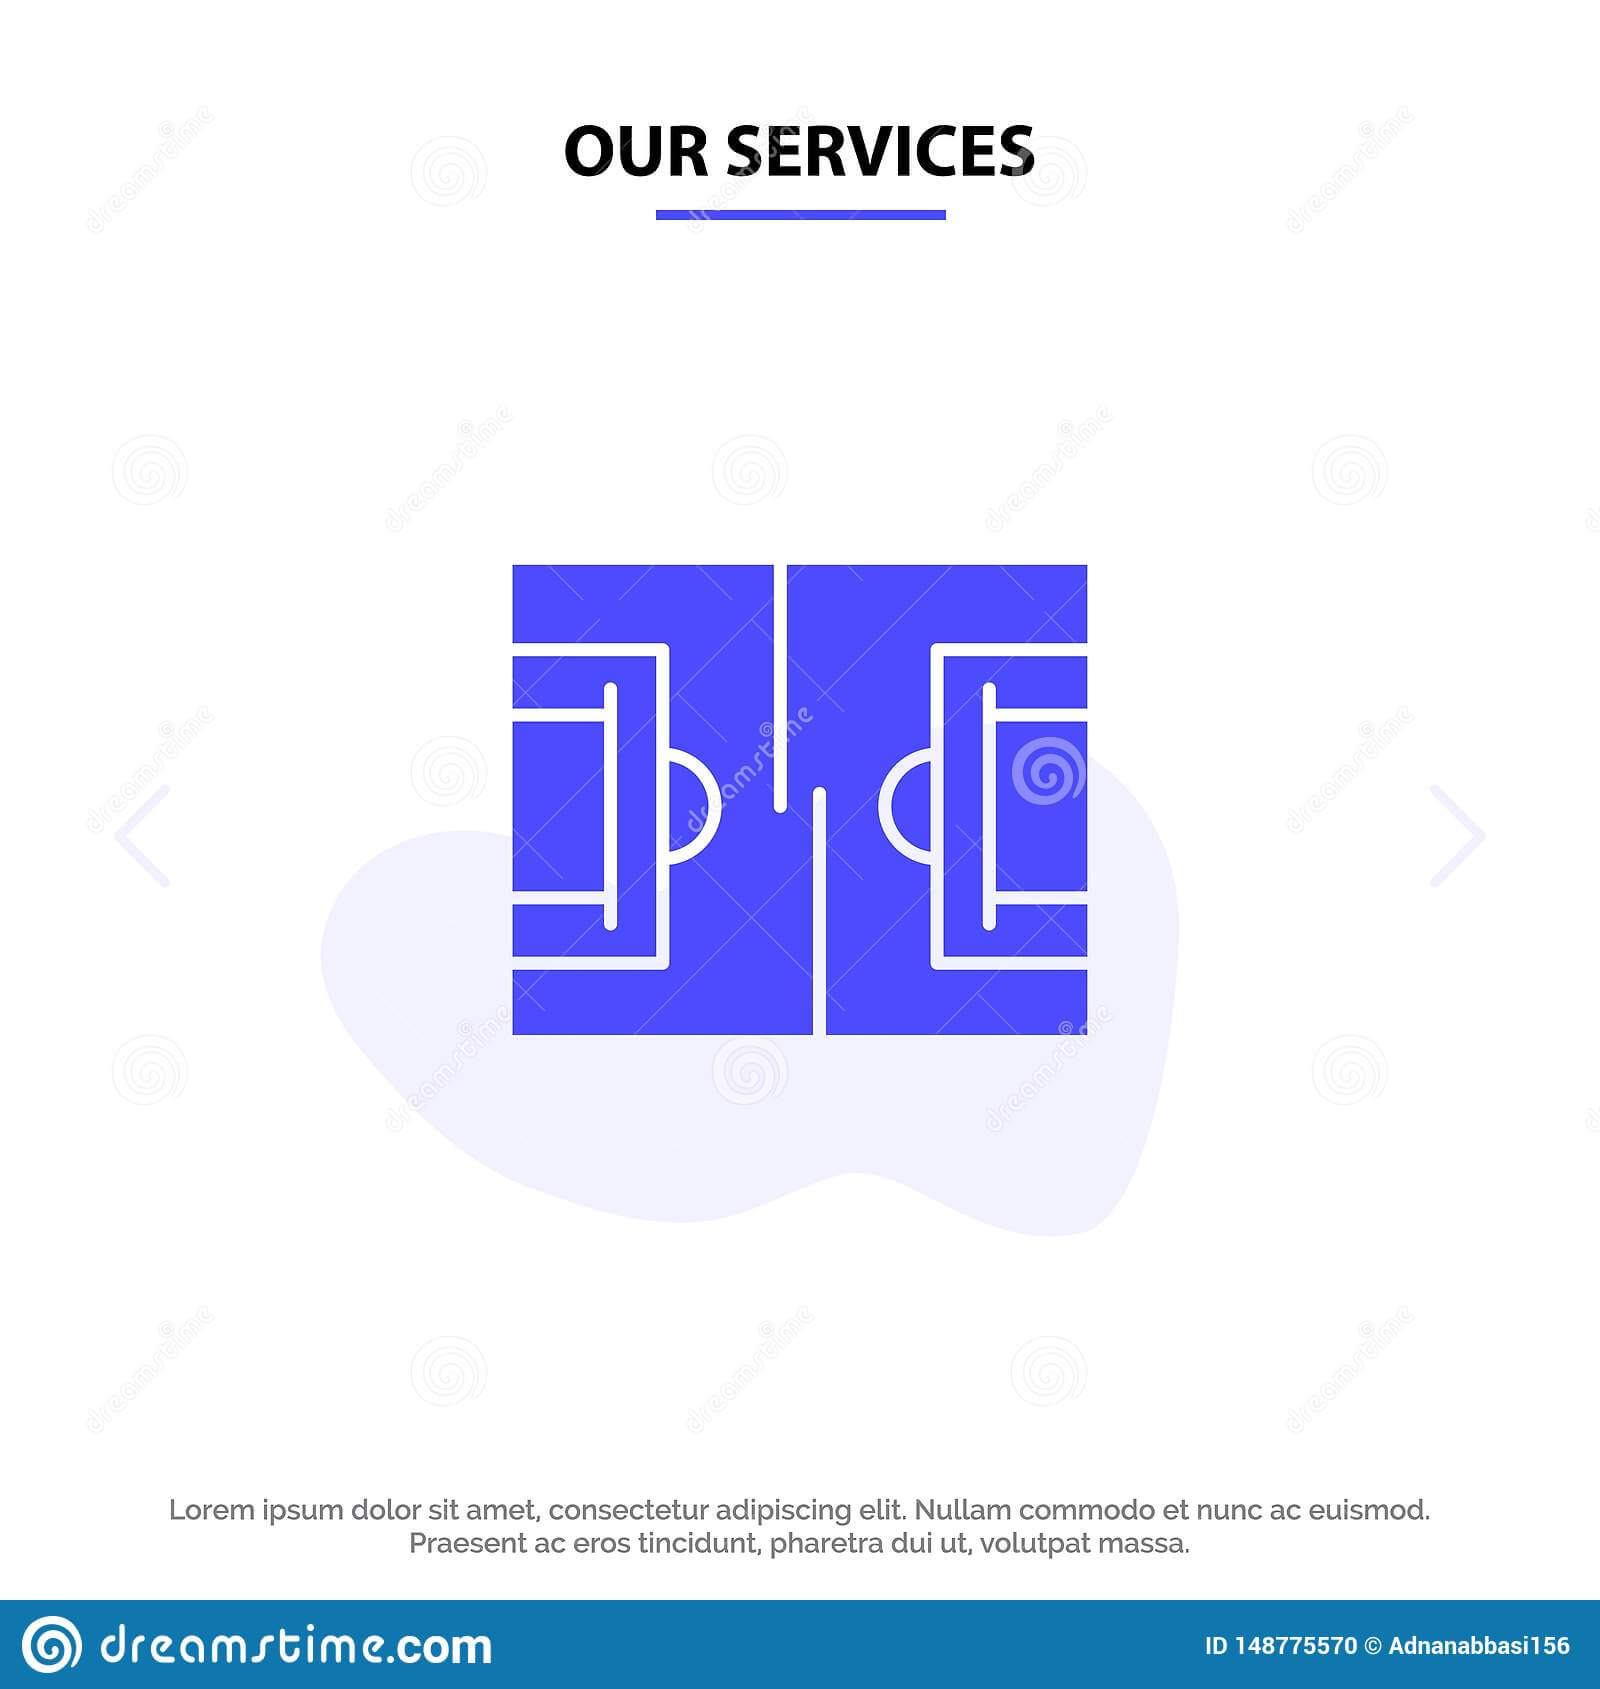 Our Services Football, Field, Sports, Soccer Solid Glyph With Football Referee Game Card Template